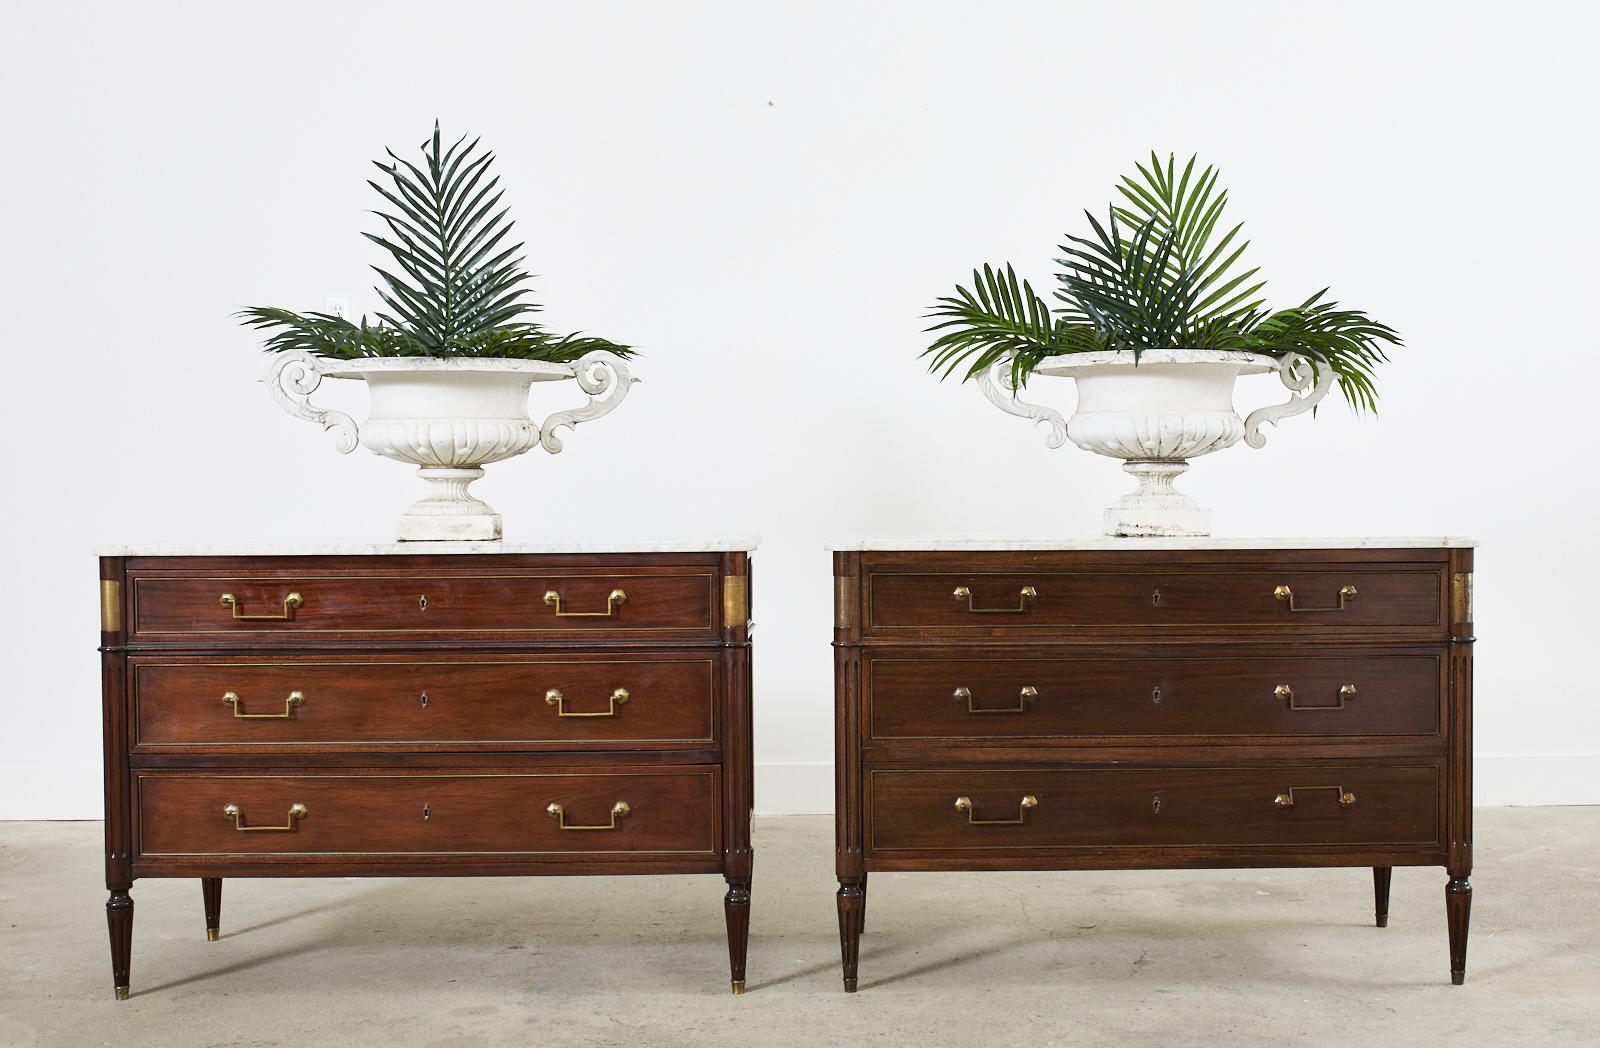 Opulent pair of French mahogany commodes or chest of drawers featuring stunning Italian Carrara marble tops. The cases are crafted in the grand neoclassical Louis XVI taste. Each case is fitted with three large storage drawers having brass border